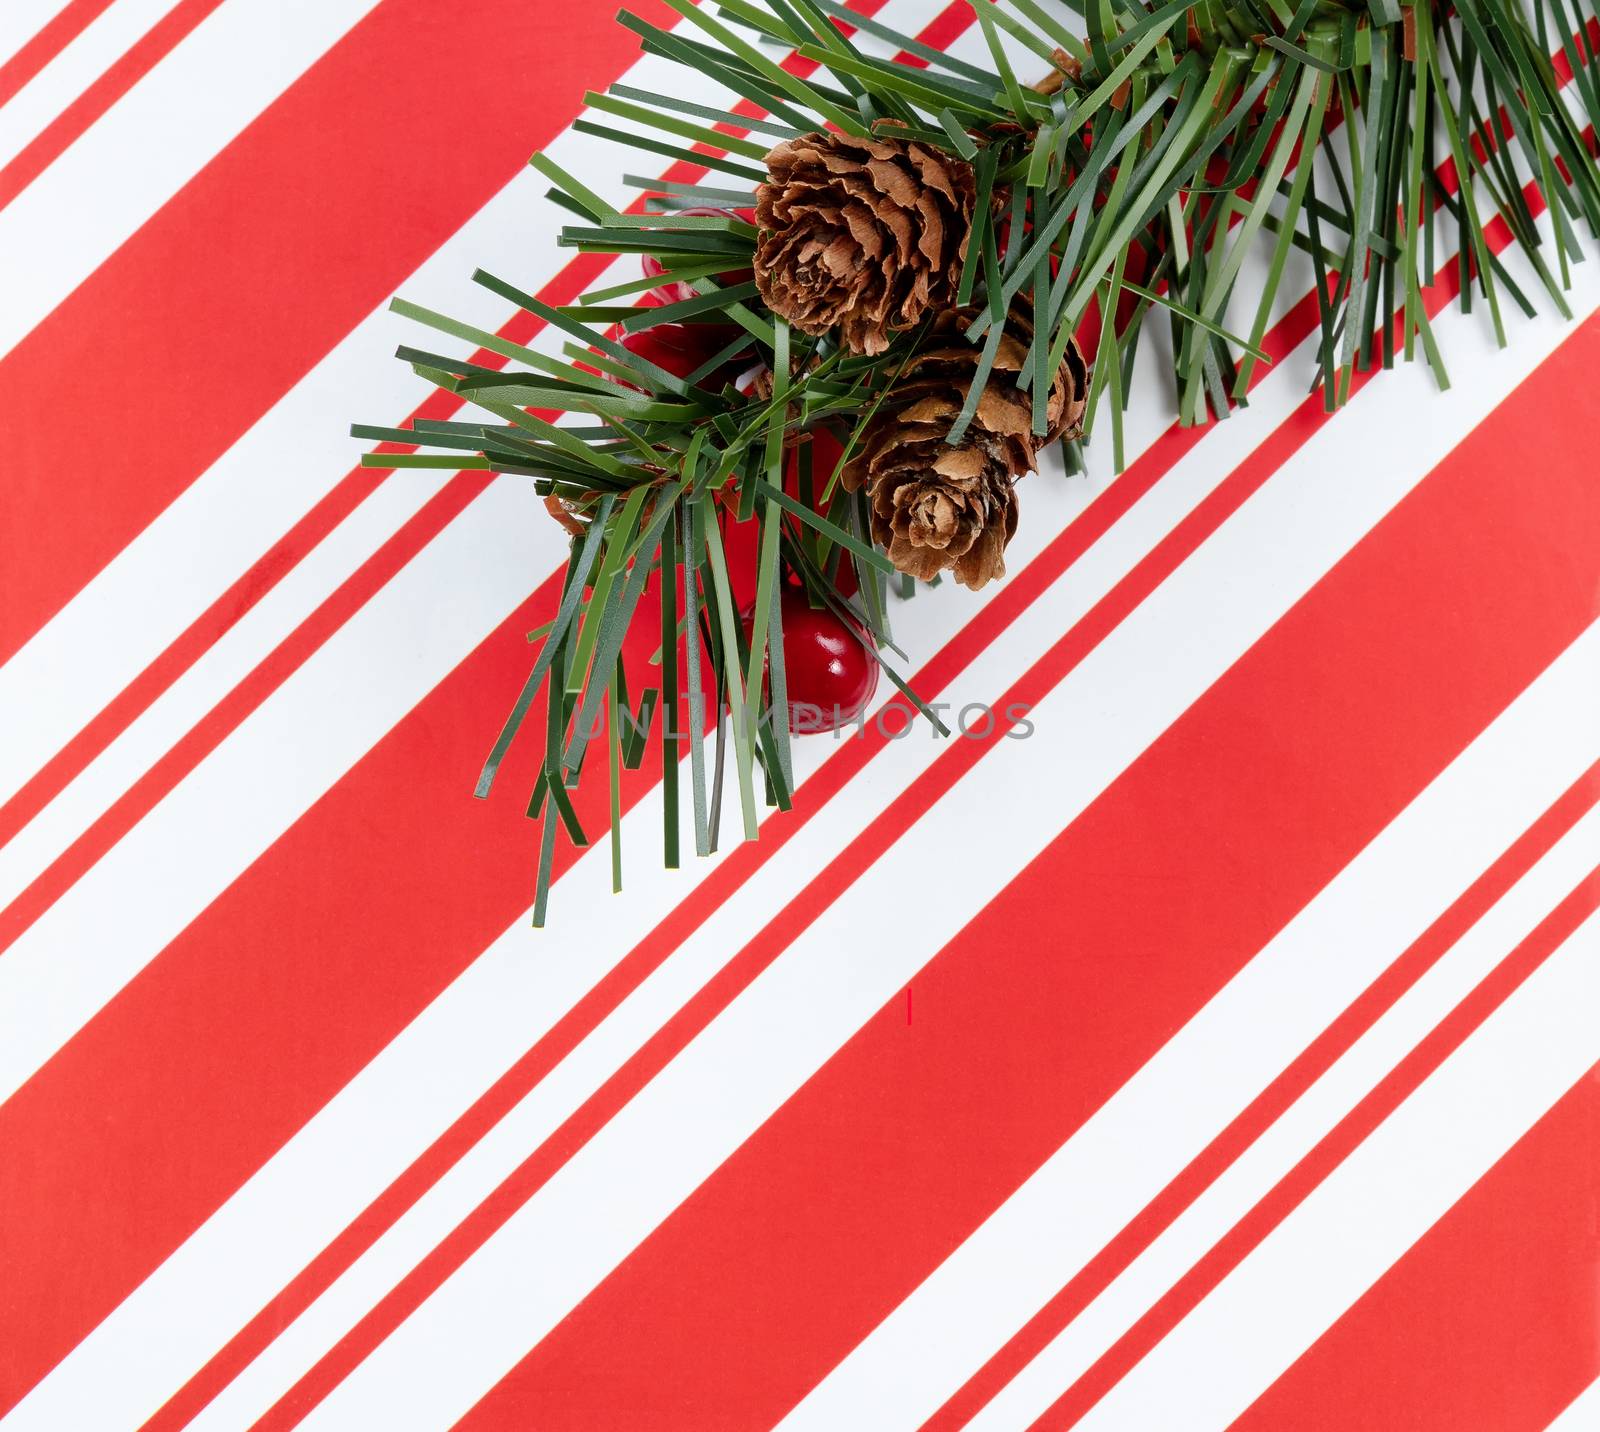 Christmas striped pattern with fir tree branch for holiday backg by tab1962